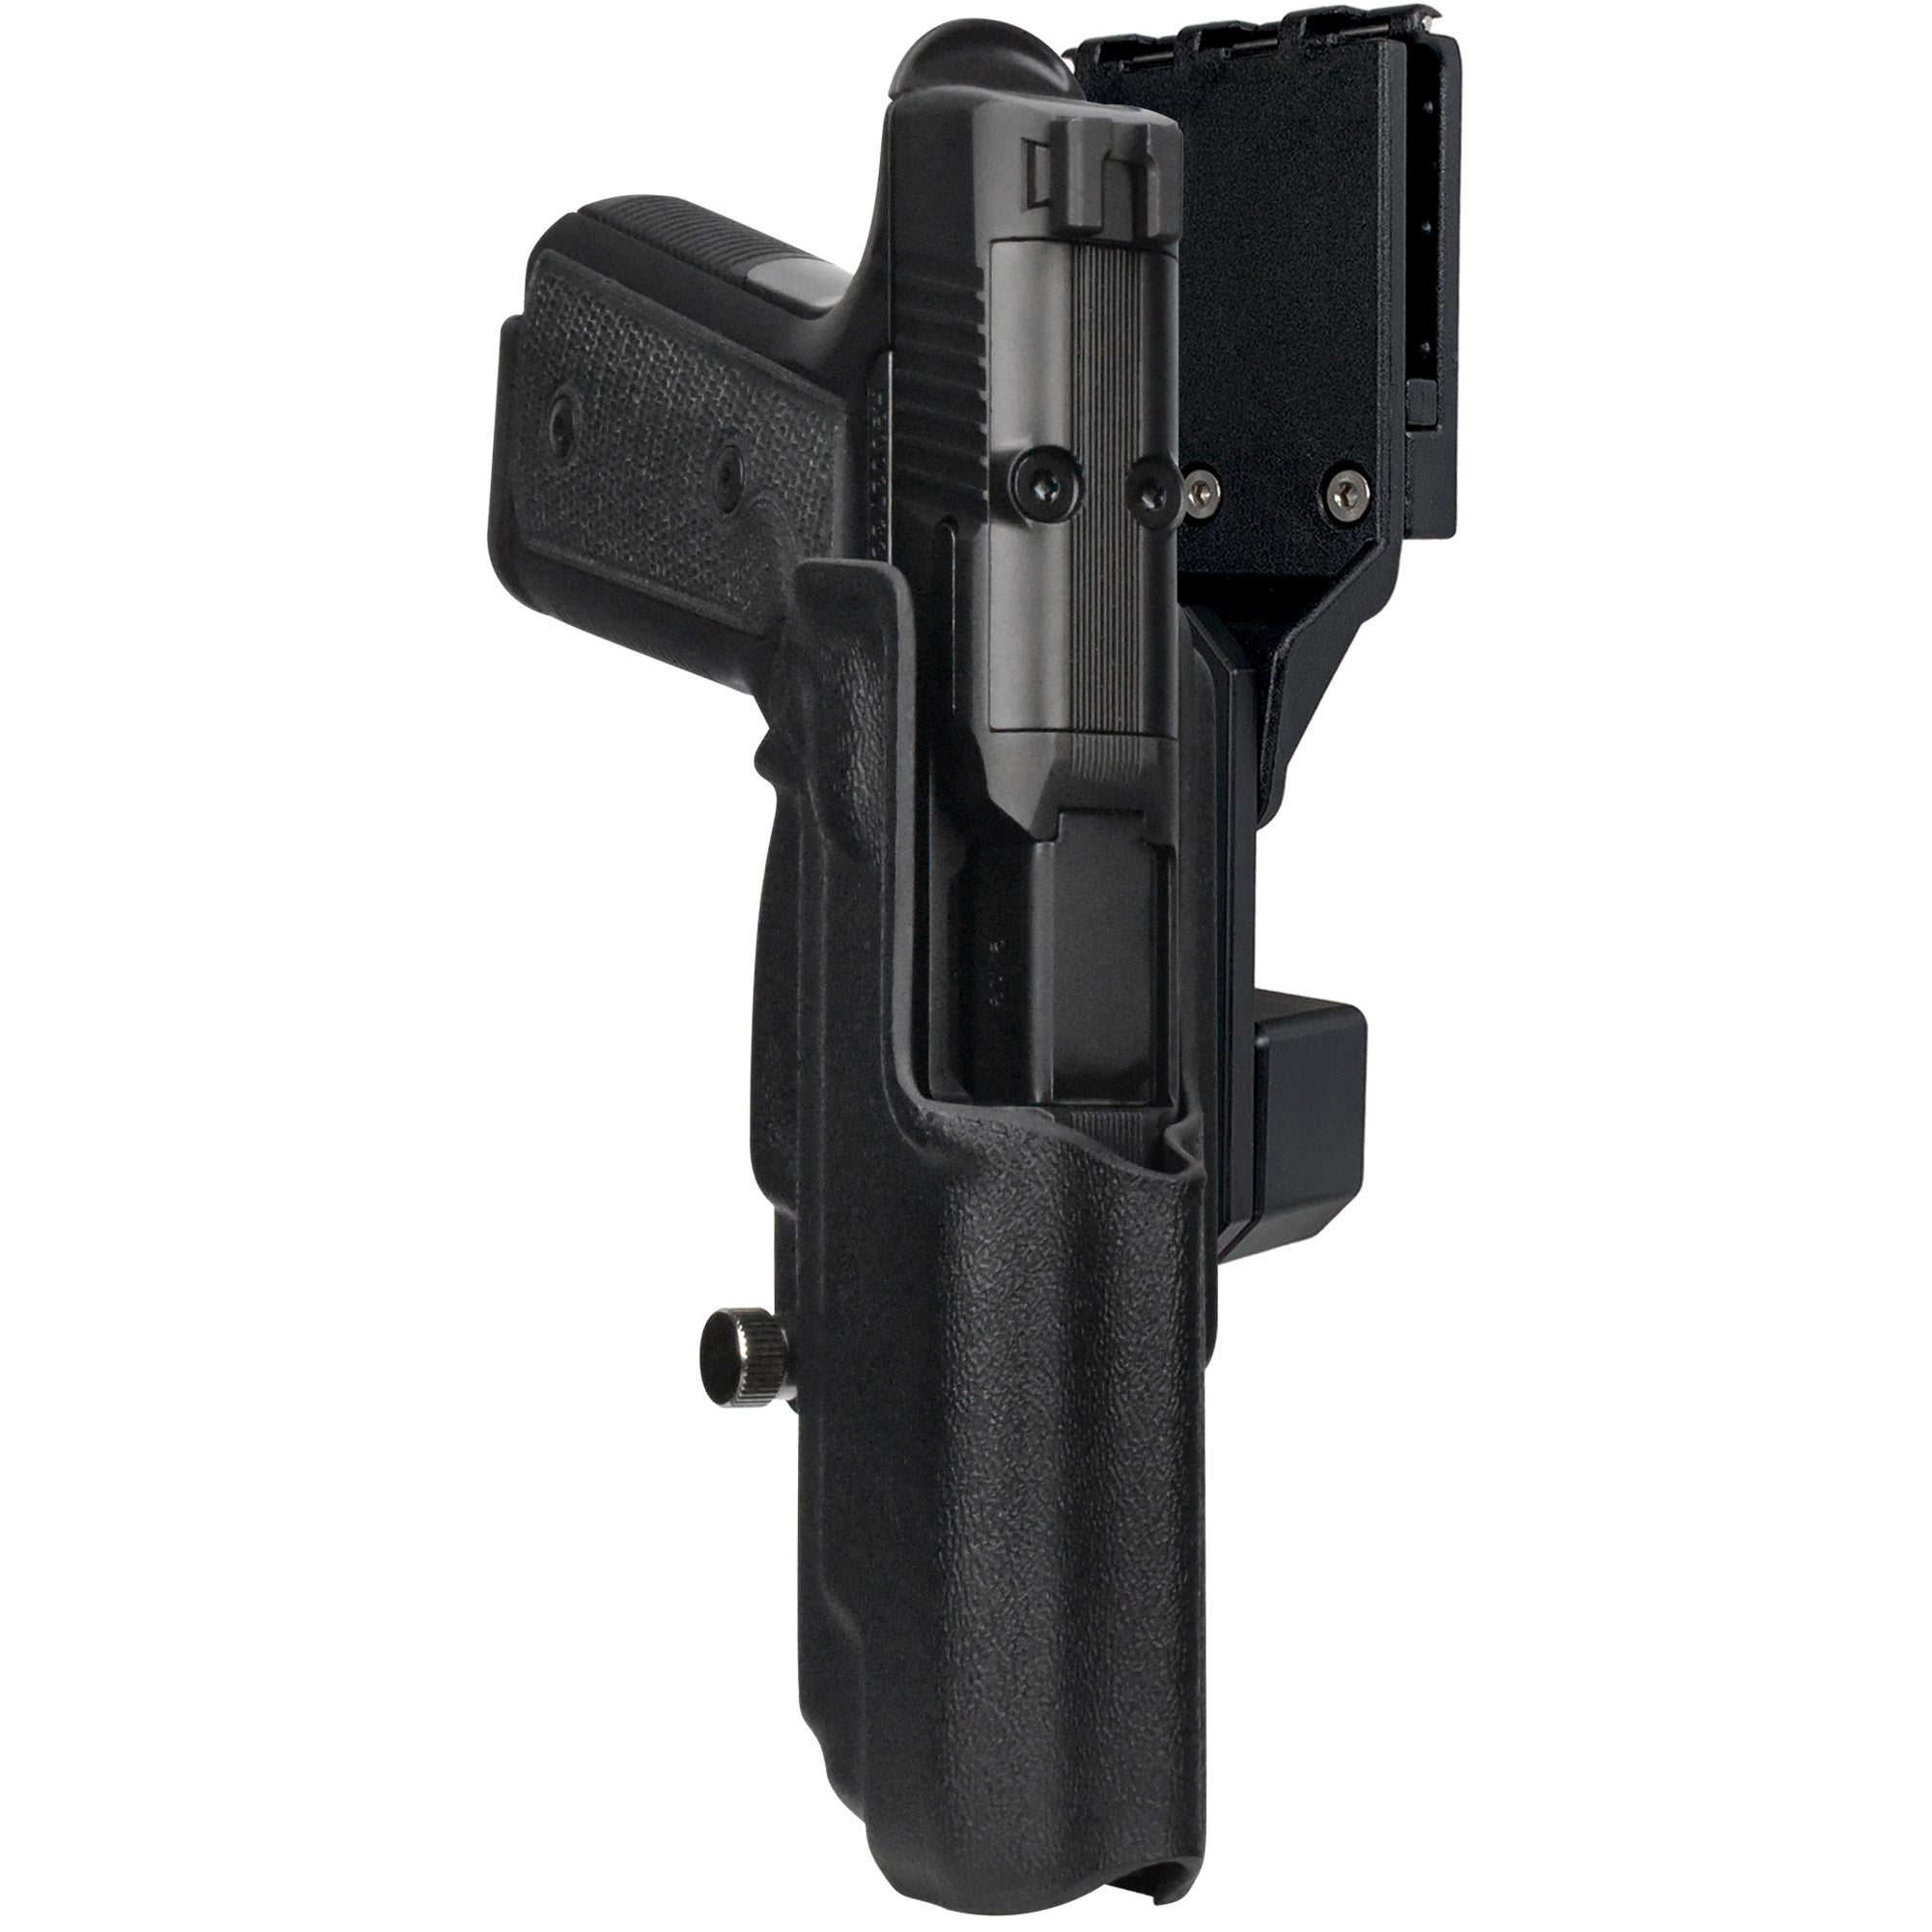 Daniel Defense H9 Pro Competition Holster in Black